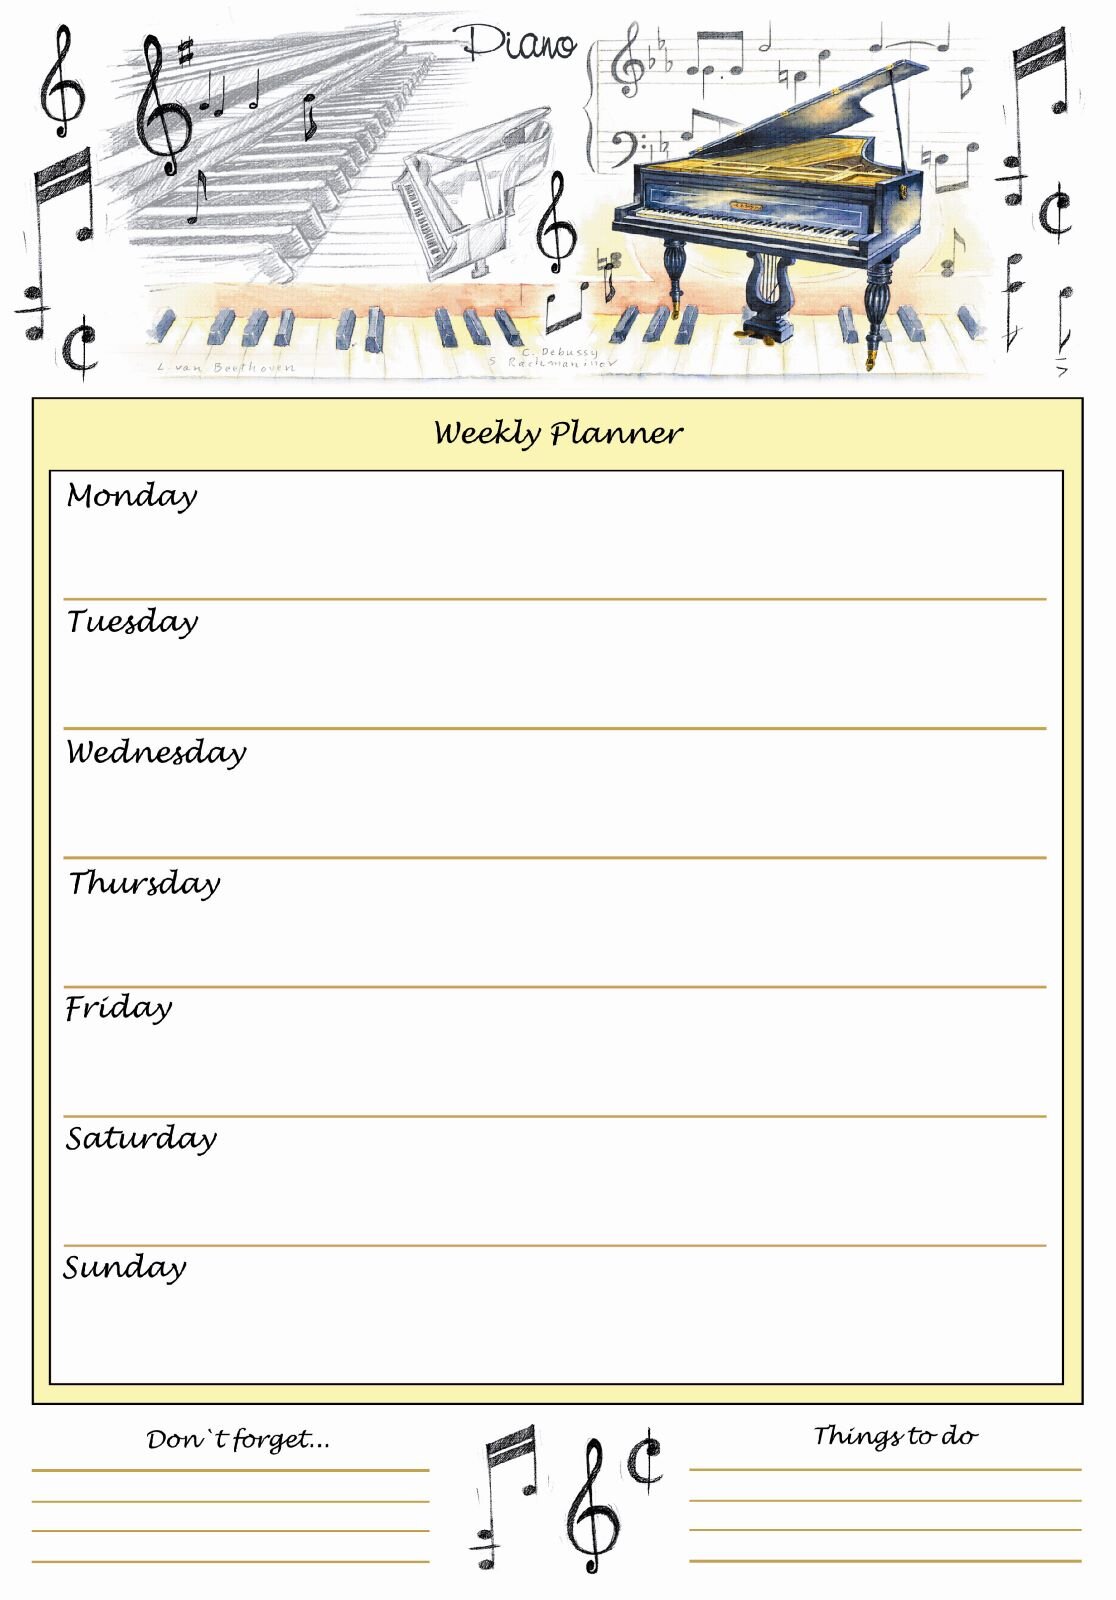 Hal Leonard Little Snoring Gifts - A4 Weekly Planner - Piano Design : photo 1